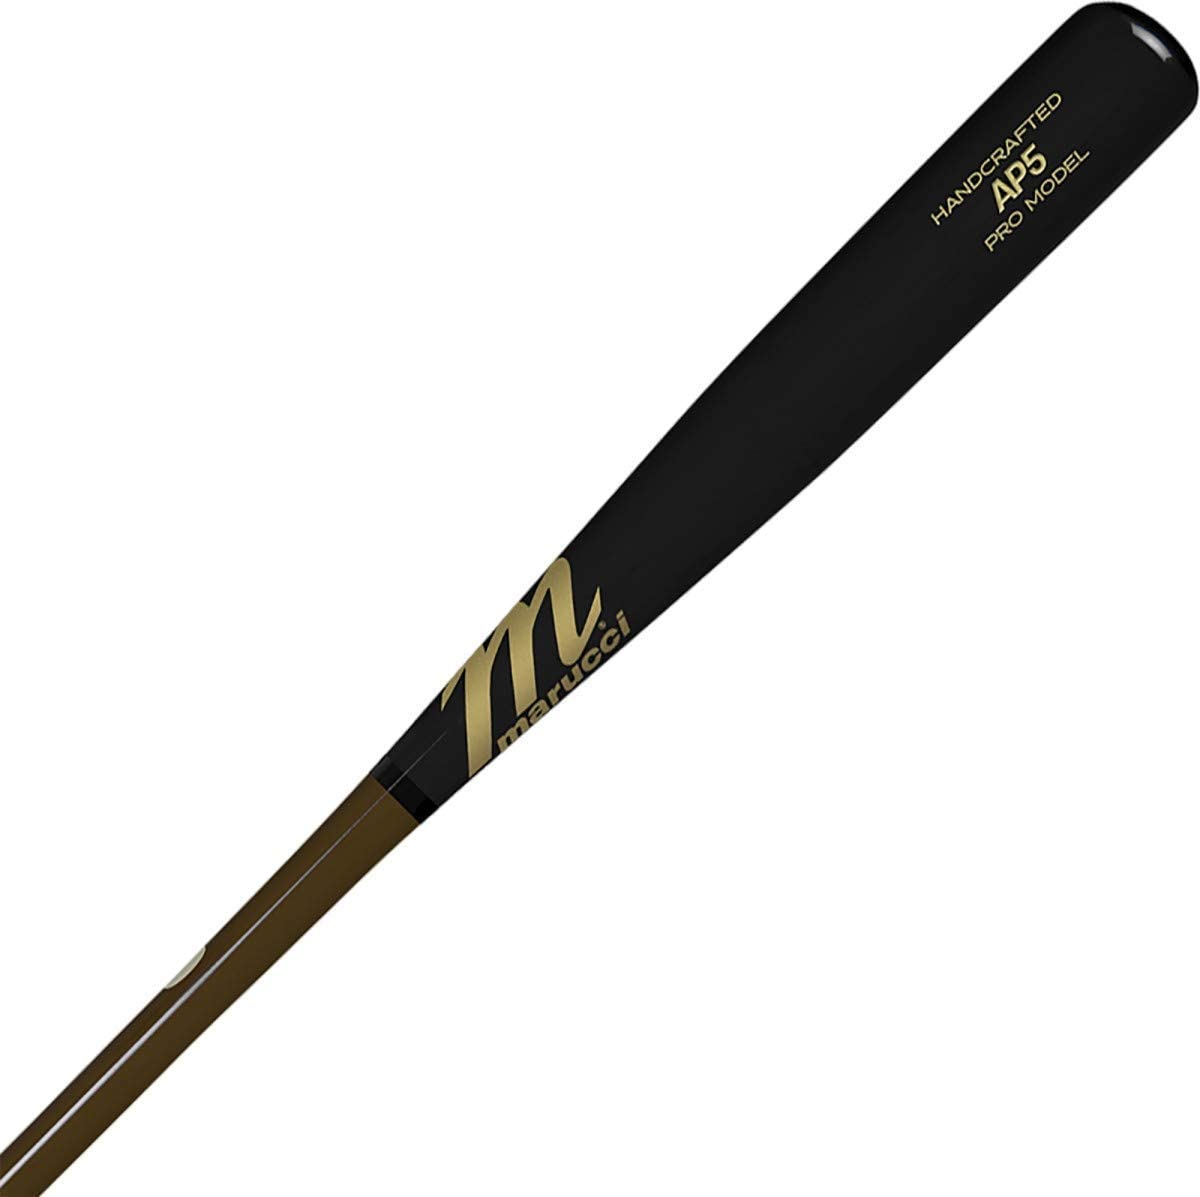 marucci-ap5-maple-pro-wood-baseball-bat-33-inch-brown-black MVE2AP5-BRBK-33 Marucci 840058700077 Knob Tapered. Handle Tapered. Barrel Large. Feel End Loaded. Handcrafted from